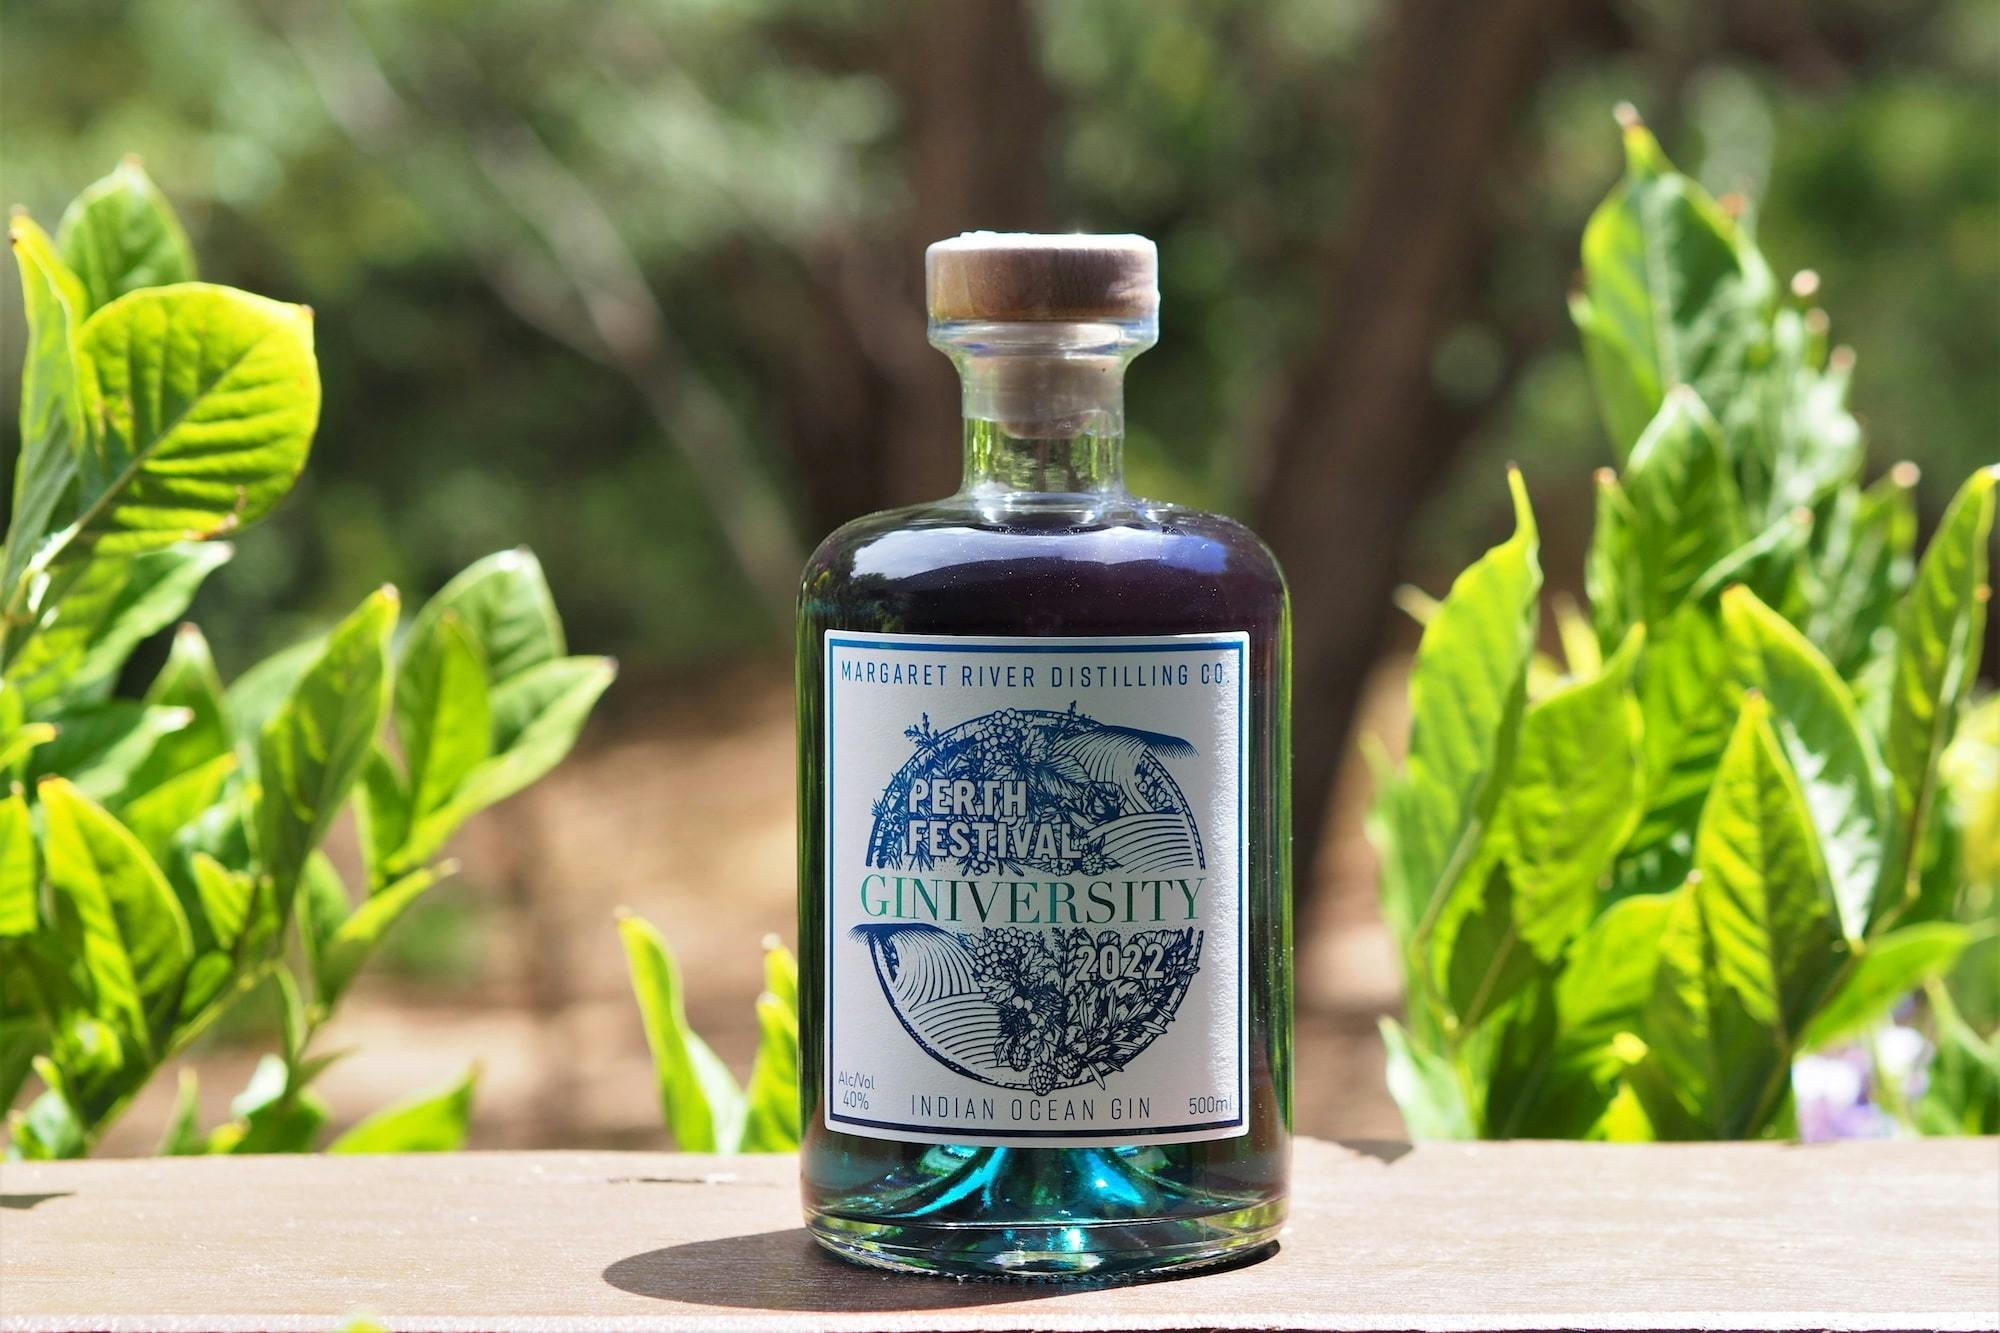 Perth Festival Limited Edition Indian Ocean Giniversity Gin